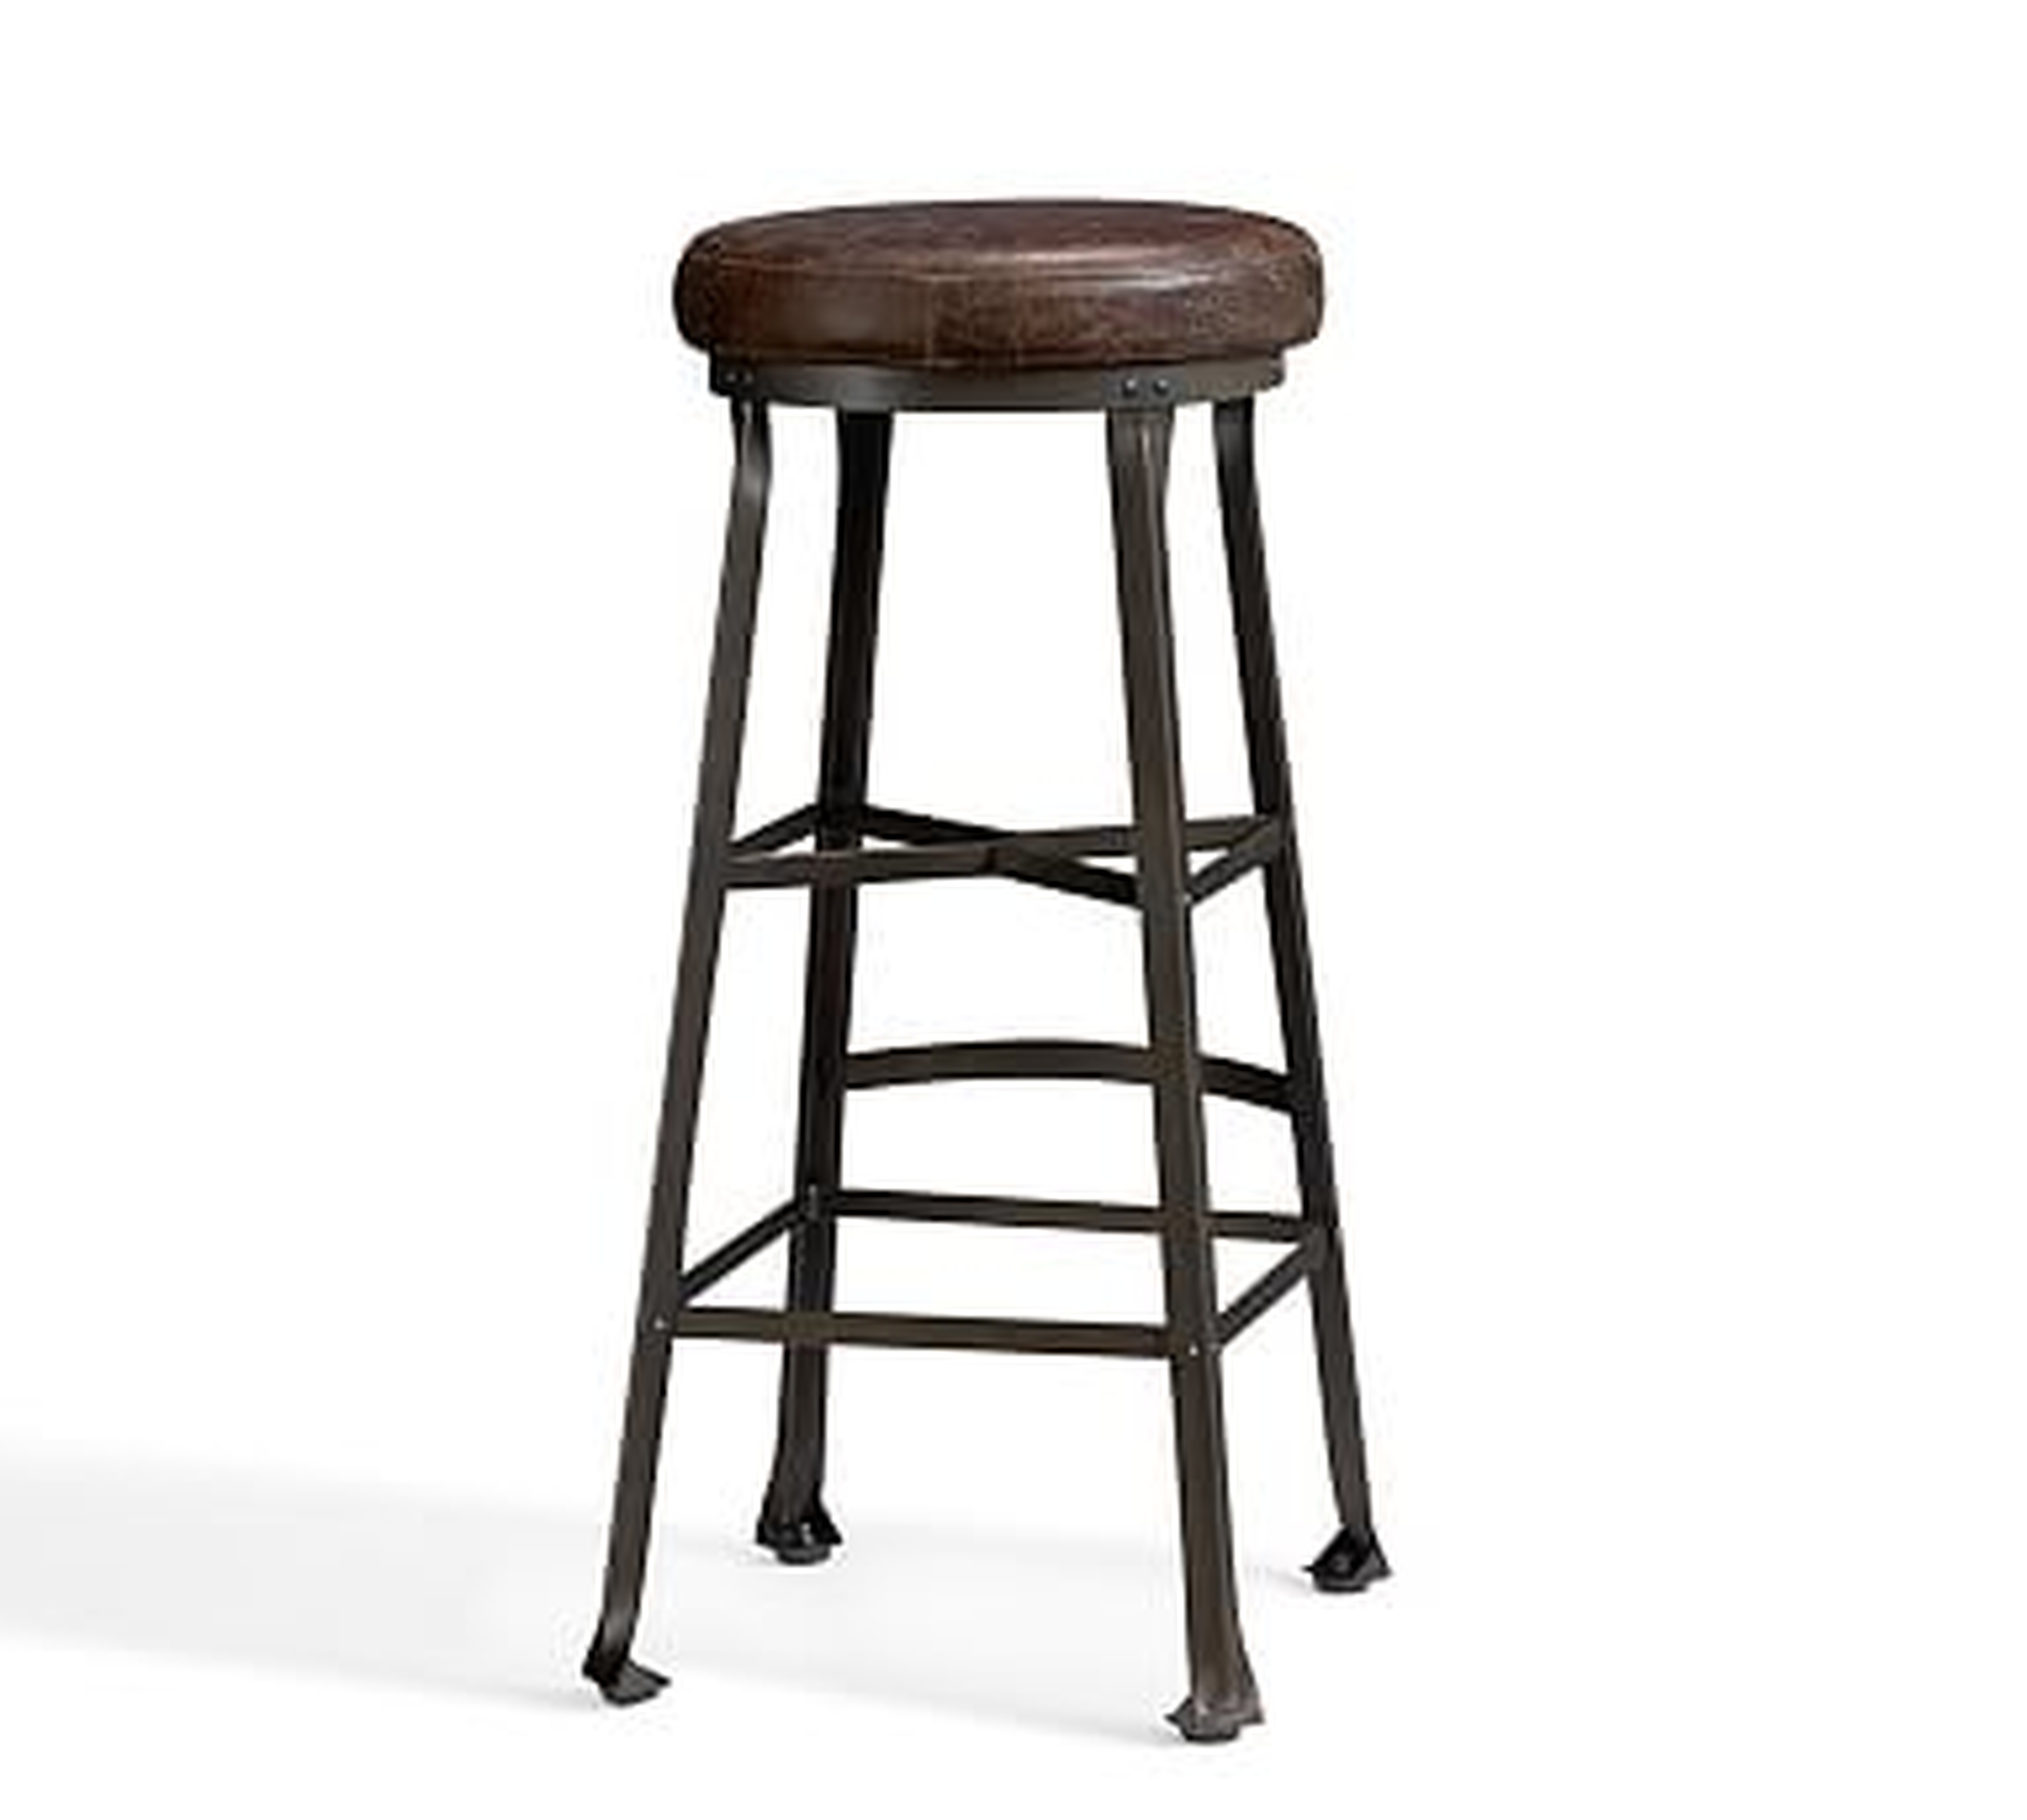 Decker Leather Counterstool, Bar Height, Chocolate - Pottery Barn